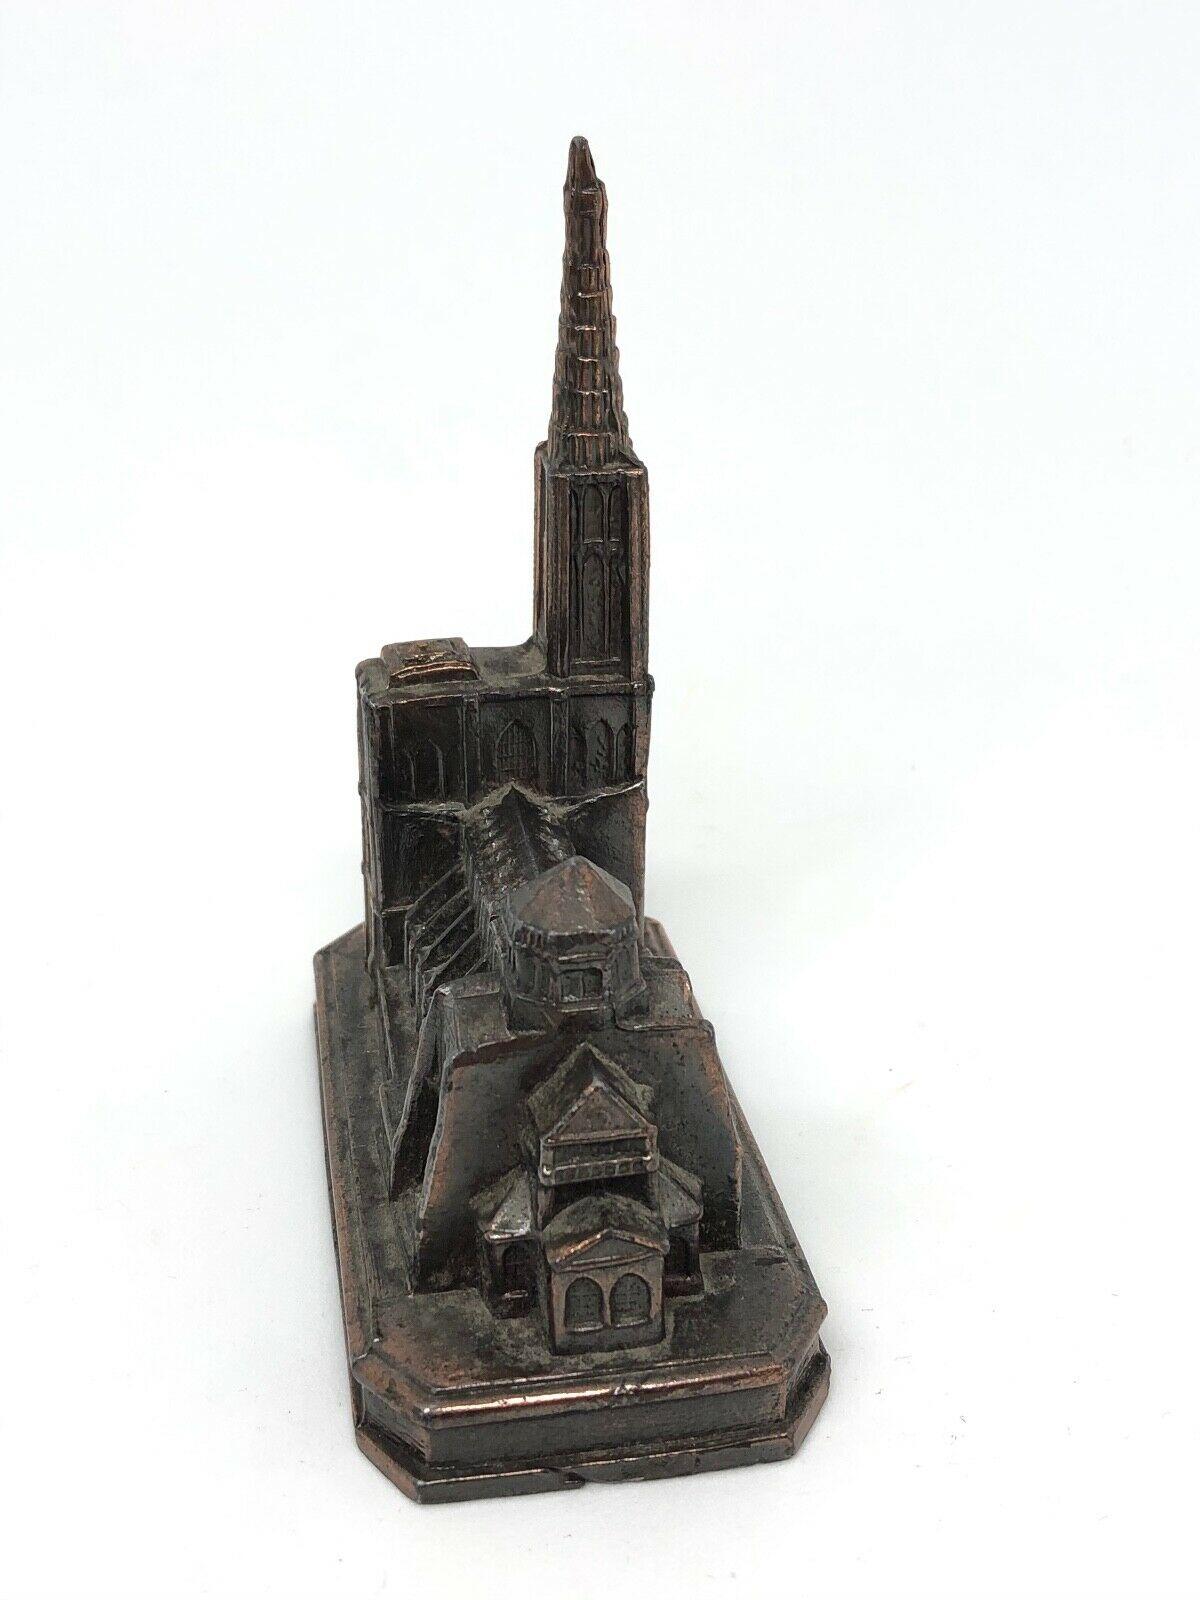 A 1950s souvenir building architectural model. Some wear with a nice patina, but this is old-age. Made of metal. A beautiful nice desktop item or just a display item in your collections of souvenirs from around the world.

 